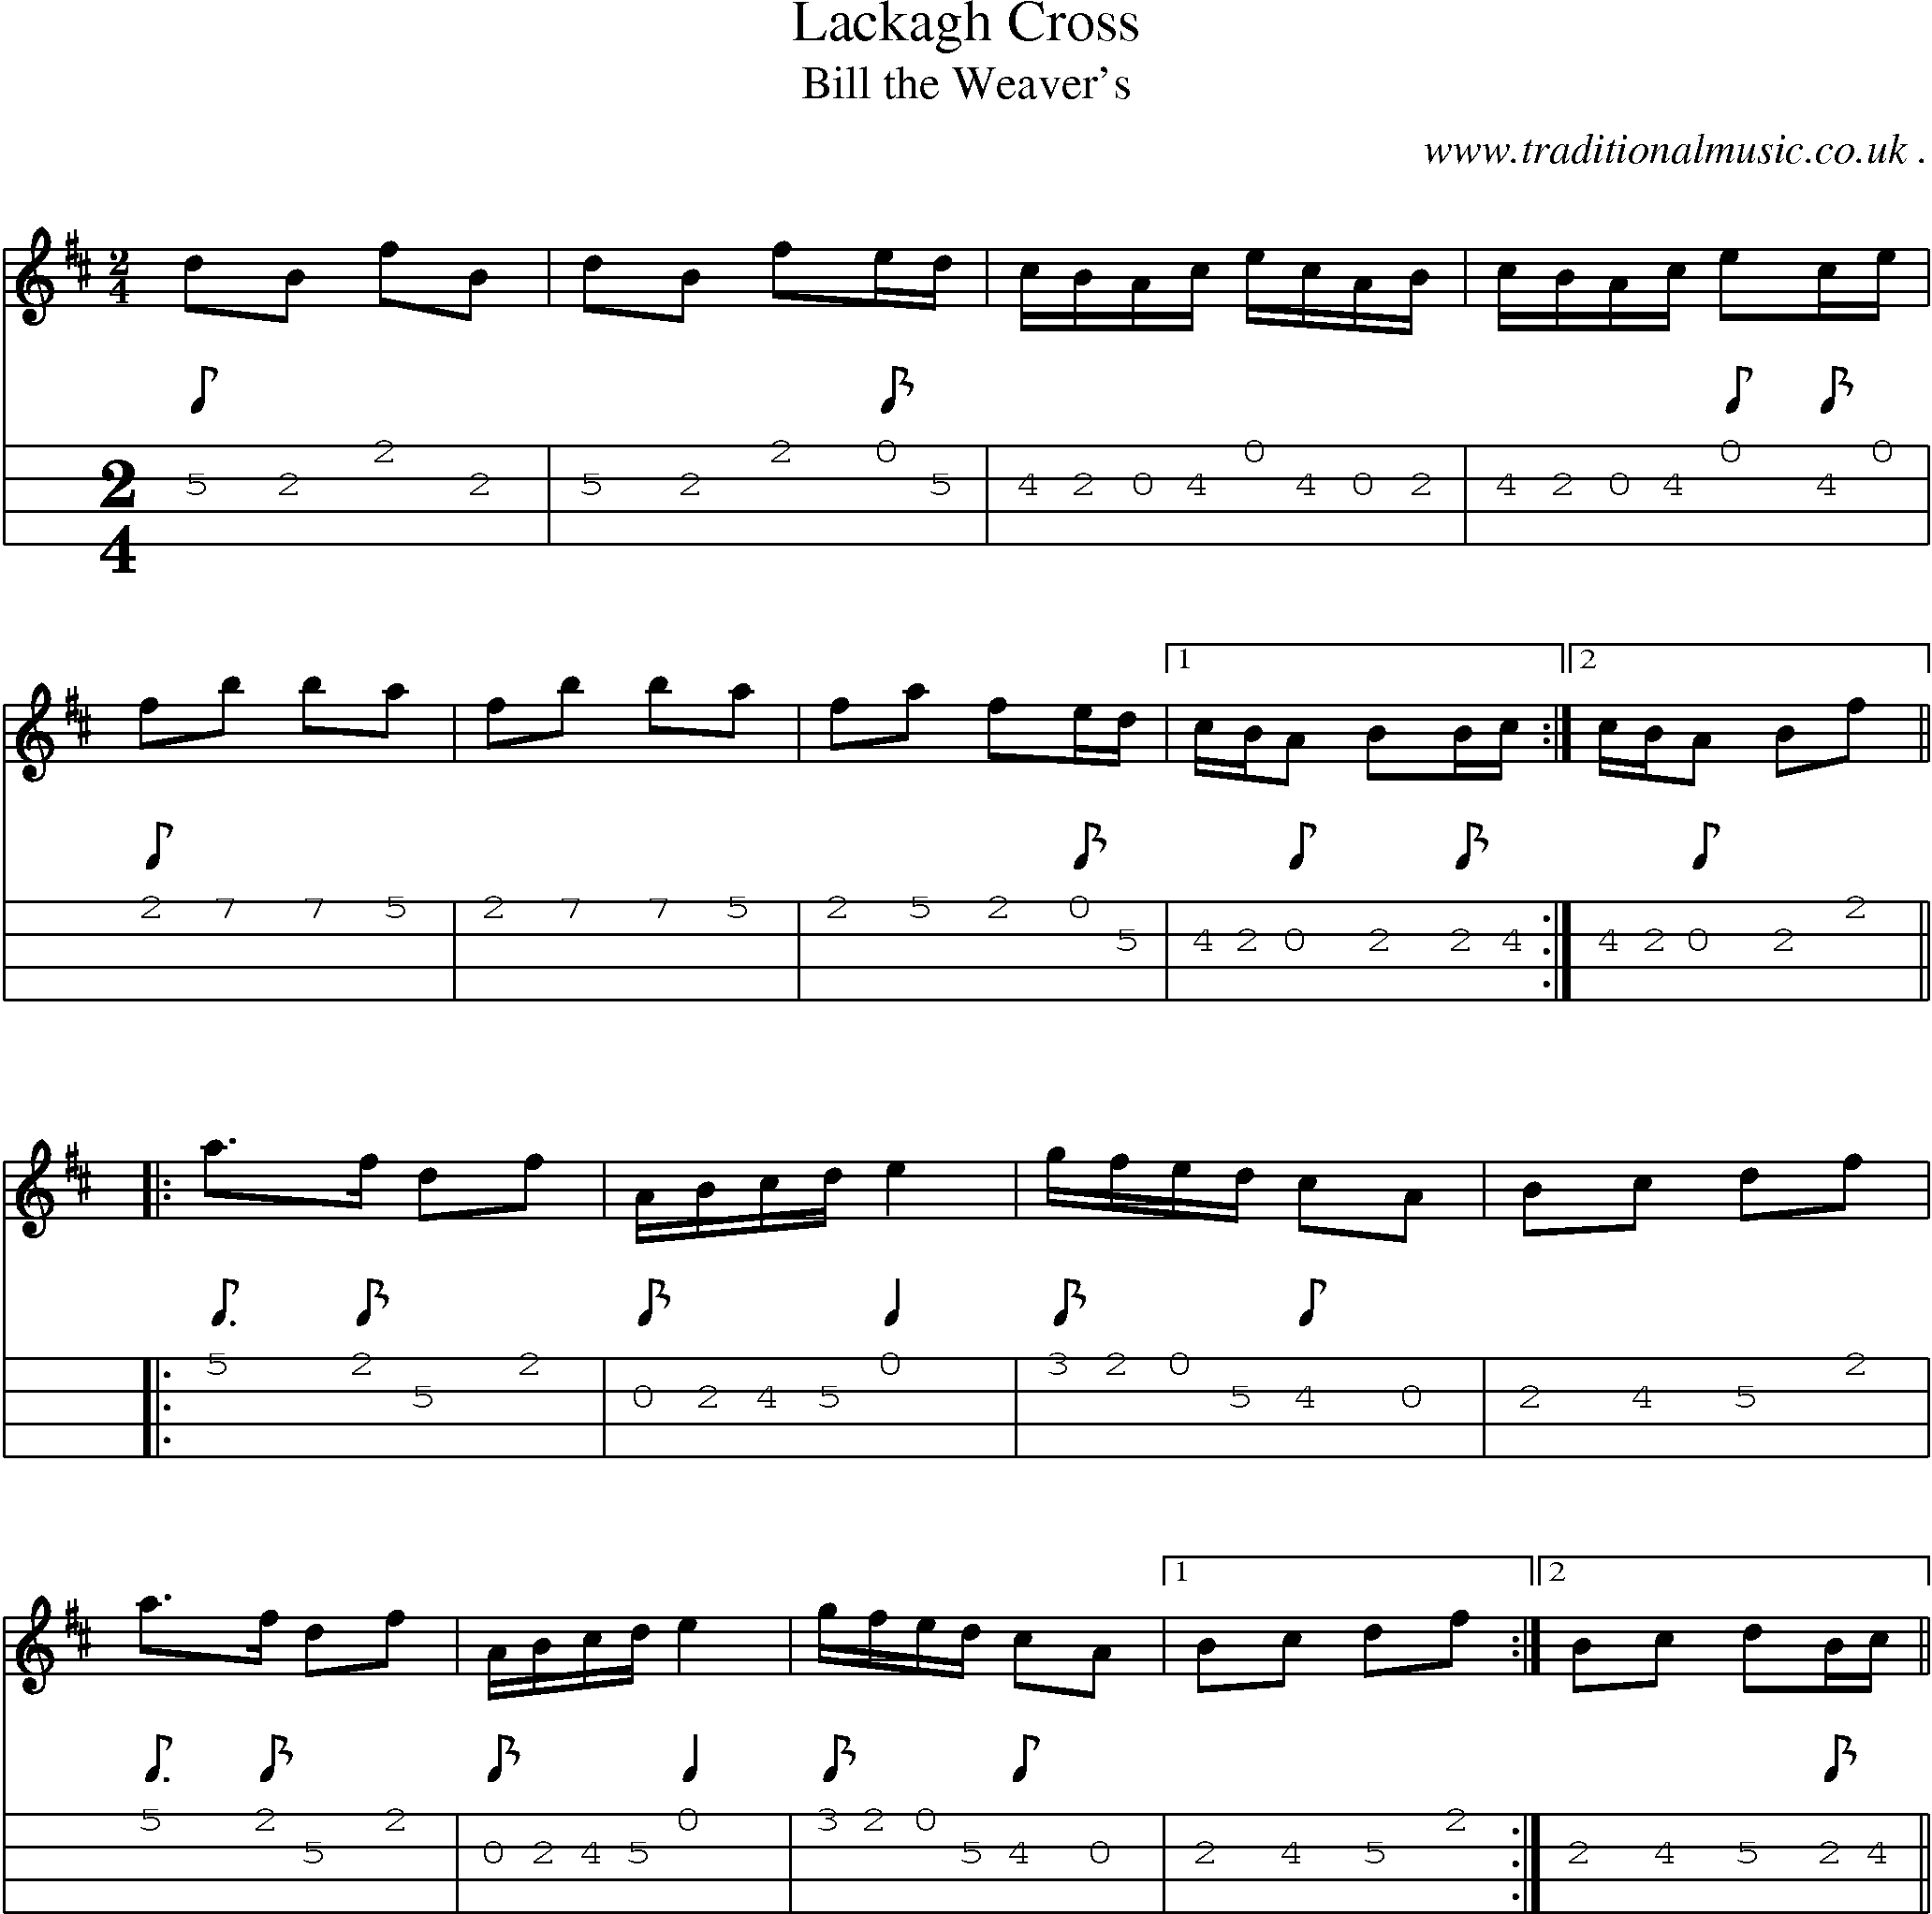 Sheet-Music and Mandolin Tabs for Lackagh Cross